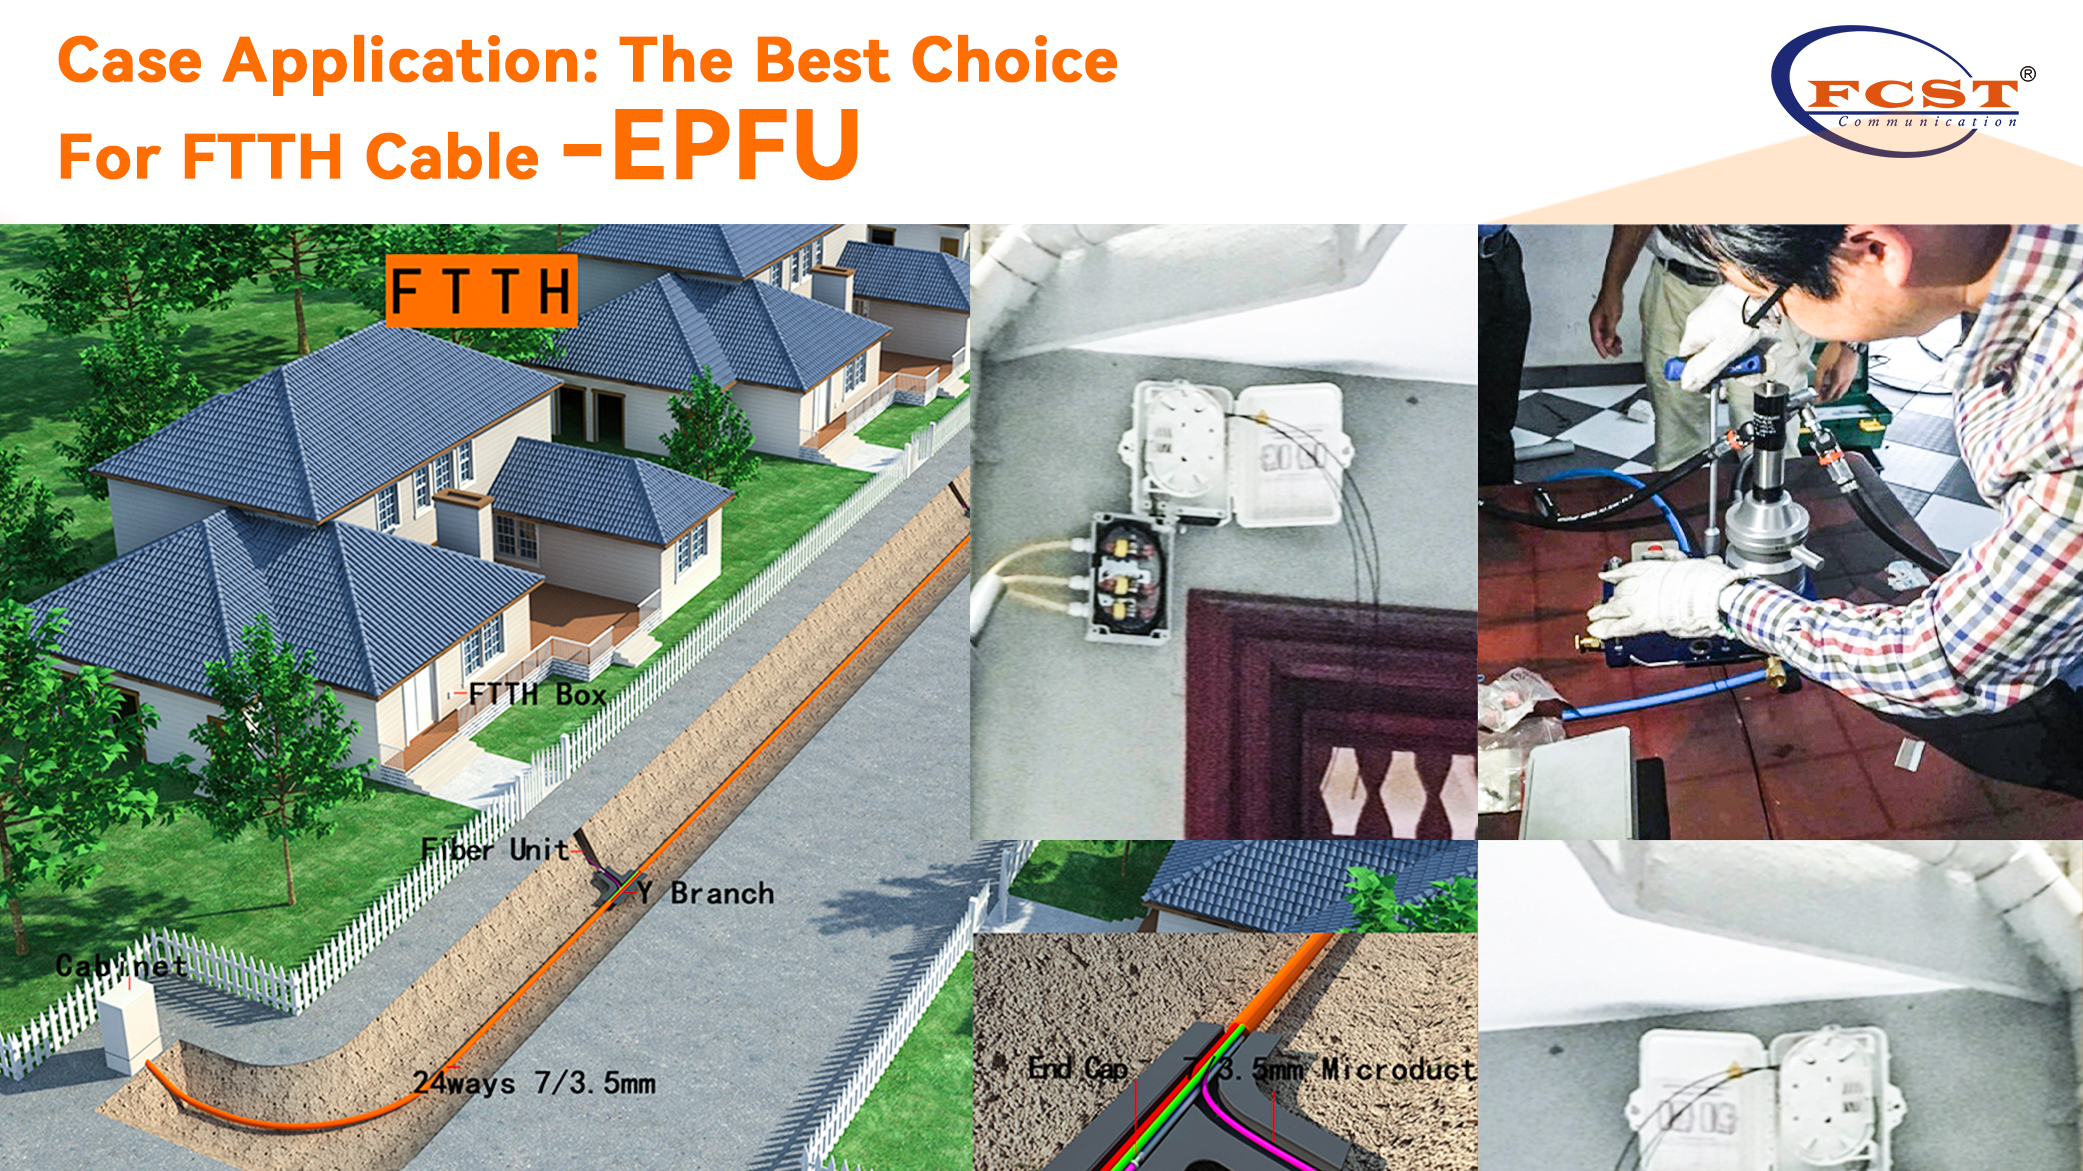 Case Application: The Best Choice For FTTH Cable -EPFU